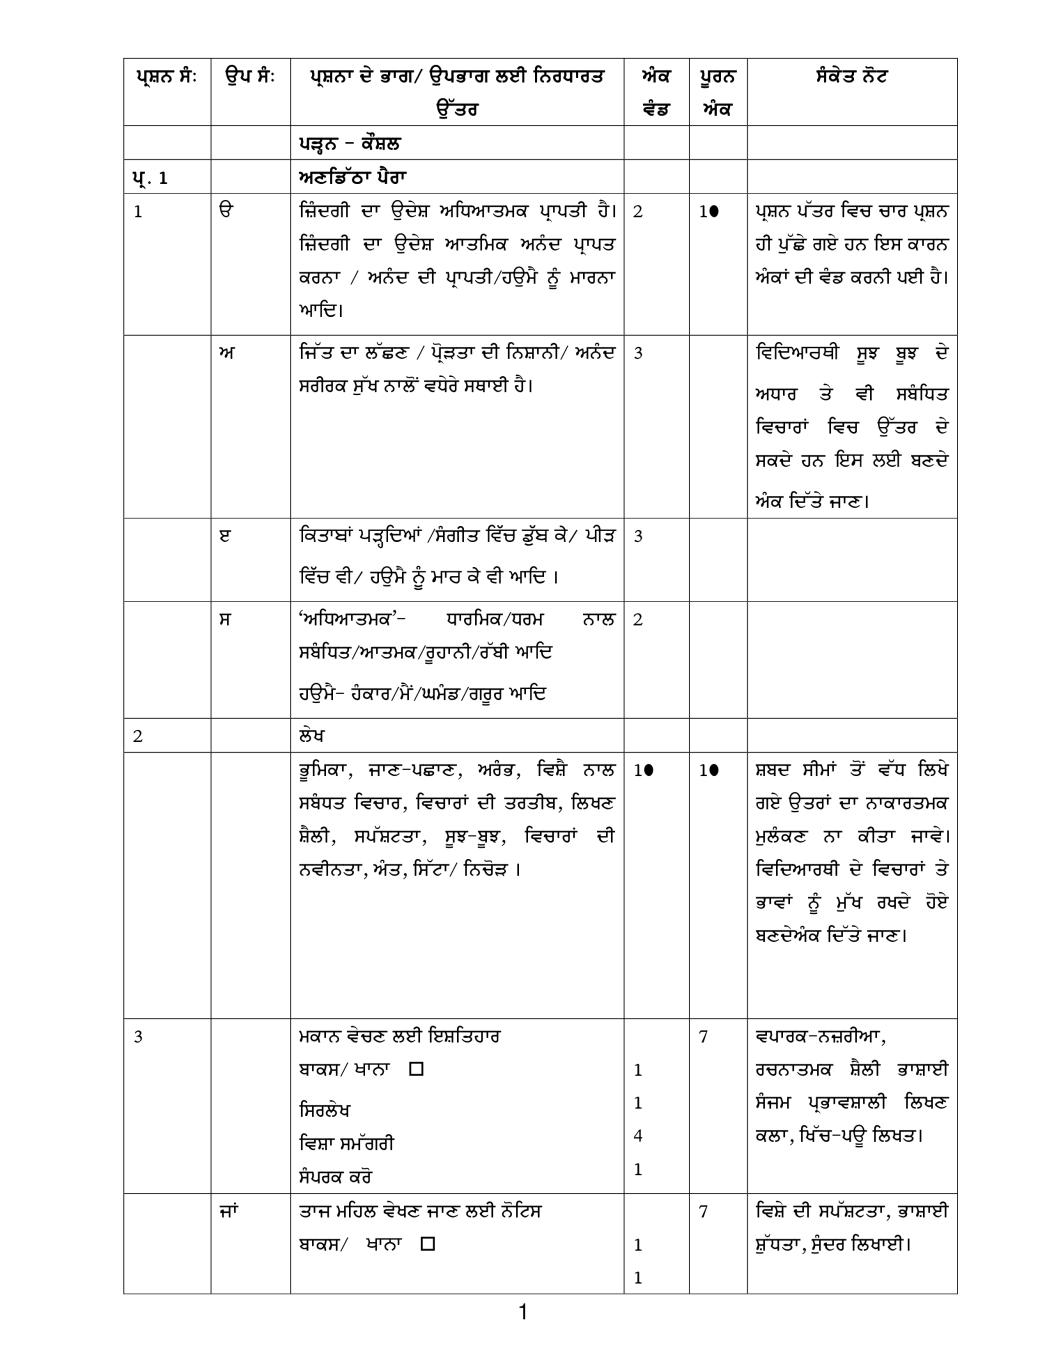 CBSE Class 12 Punjabi Question Paper 2019 Solutions - Page 1